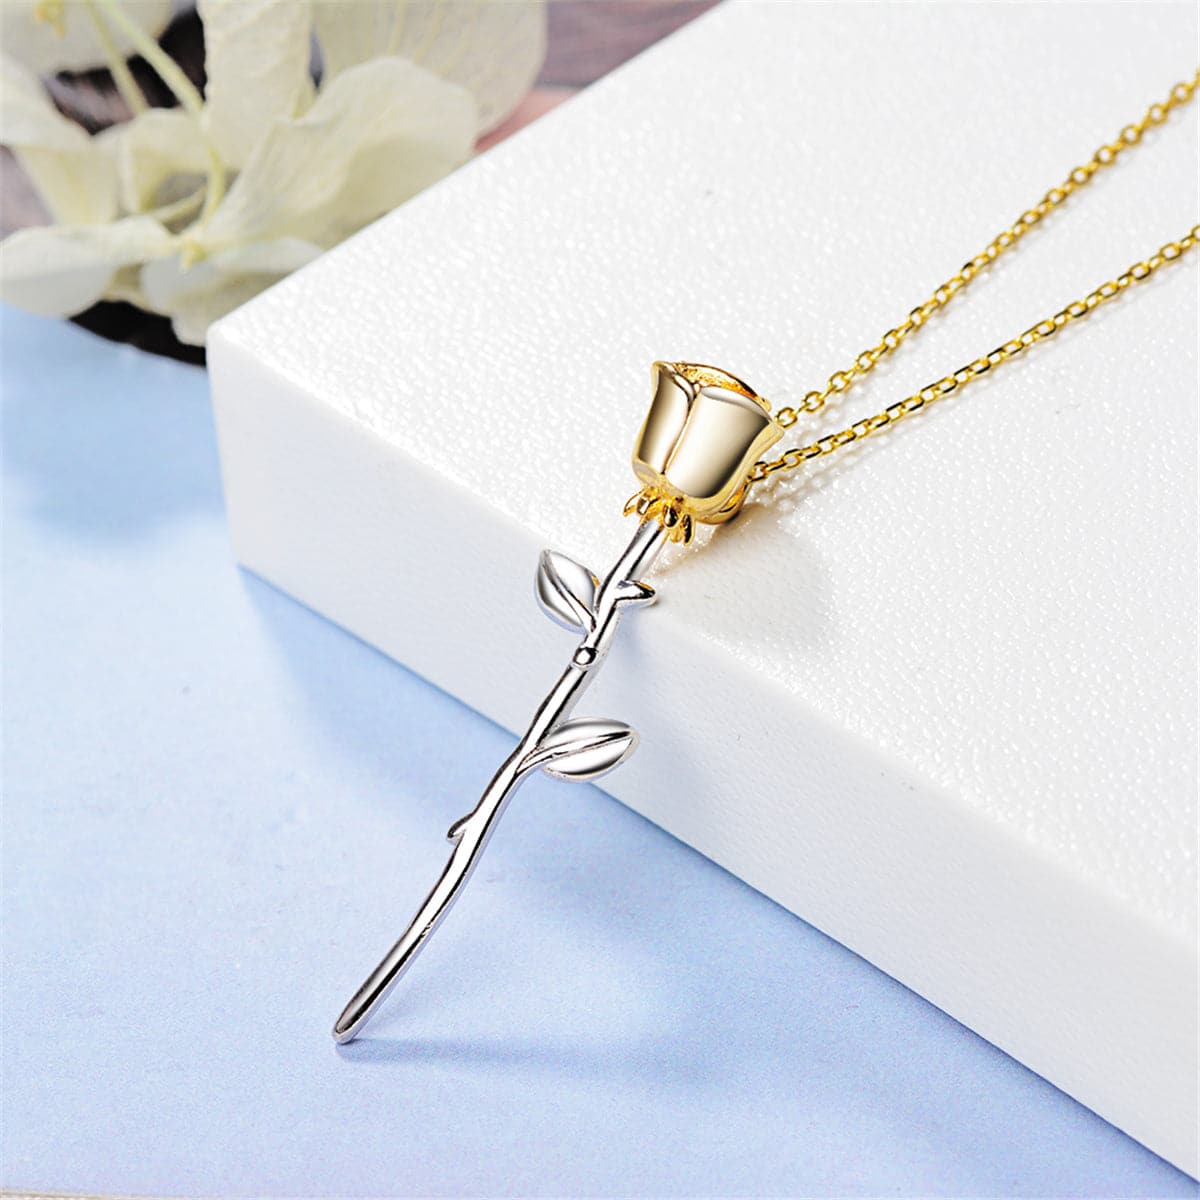 Silver-Plated & 18k Gold-Plated Rose Pendant Necklace - streetregion